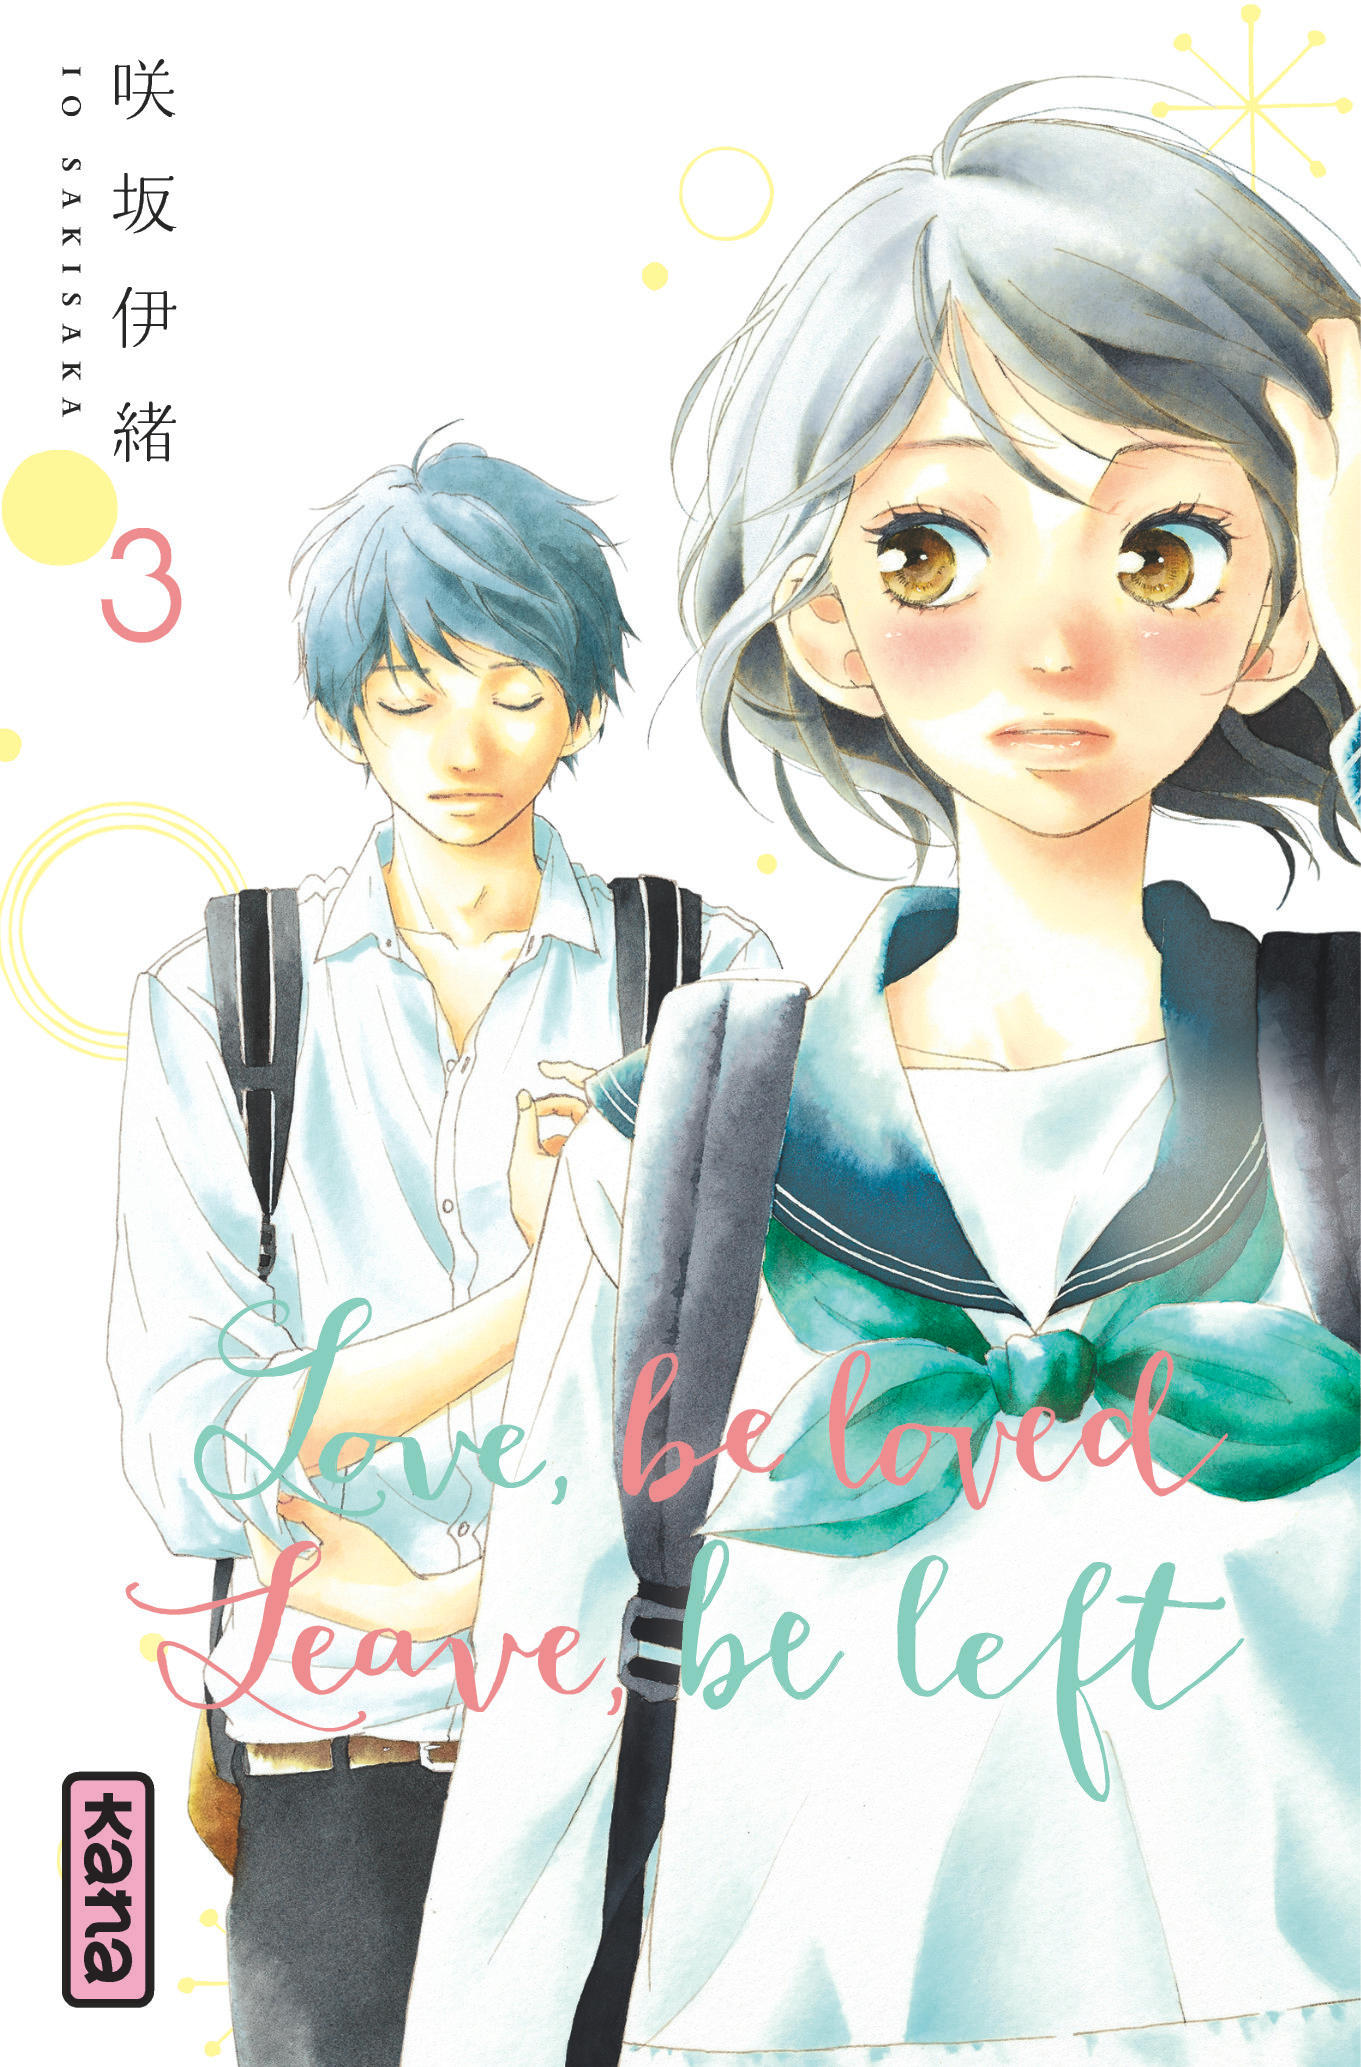 Love, be loved Leave, be left – Tome 3 - couv